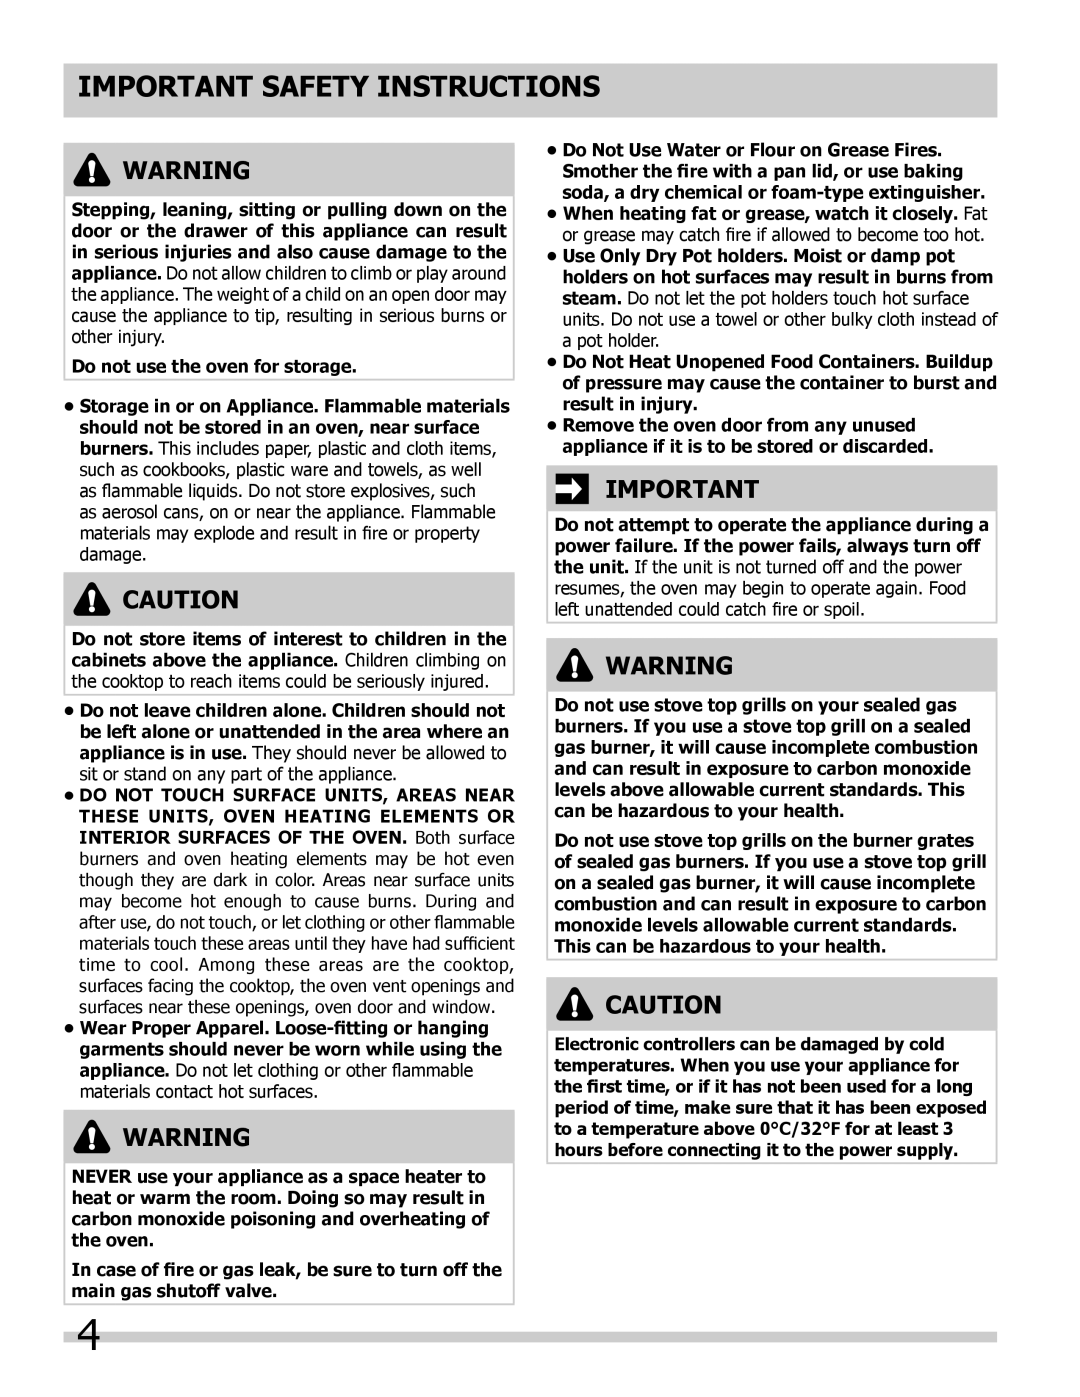 Frigidaire FPDF4085KF important safety instructions Important Safety Instructions, Do not use the oven for storage 